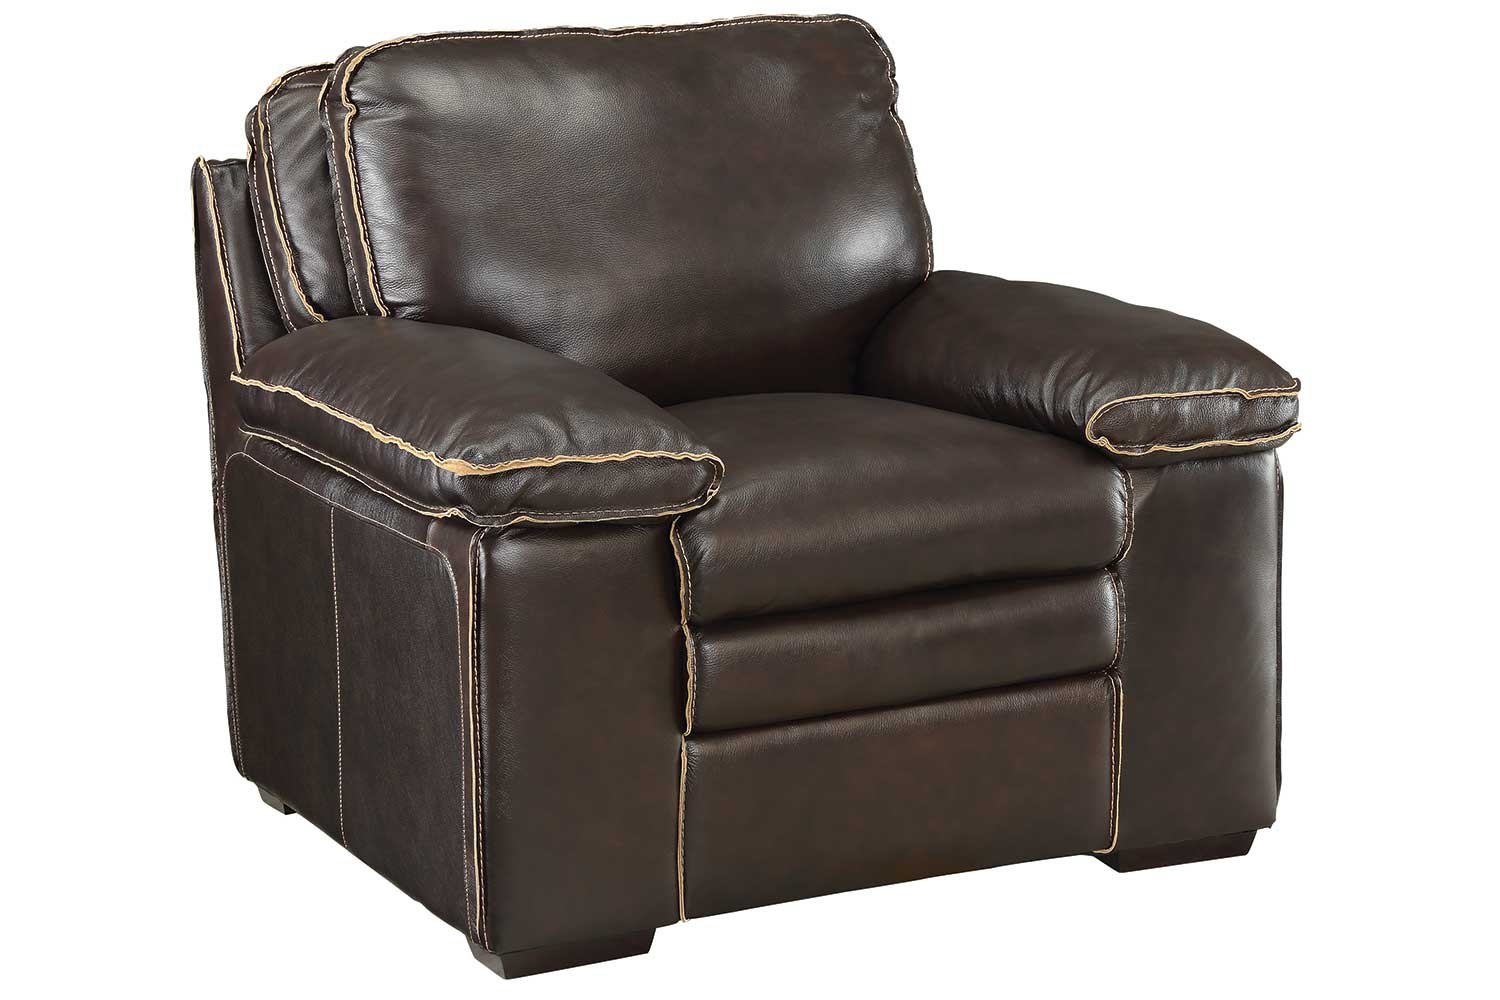 Coaster Regalvale Chair - Two-tone Brown